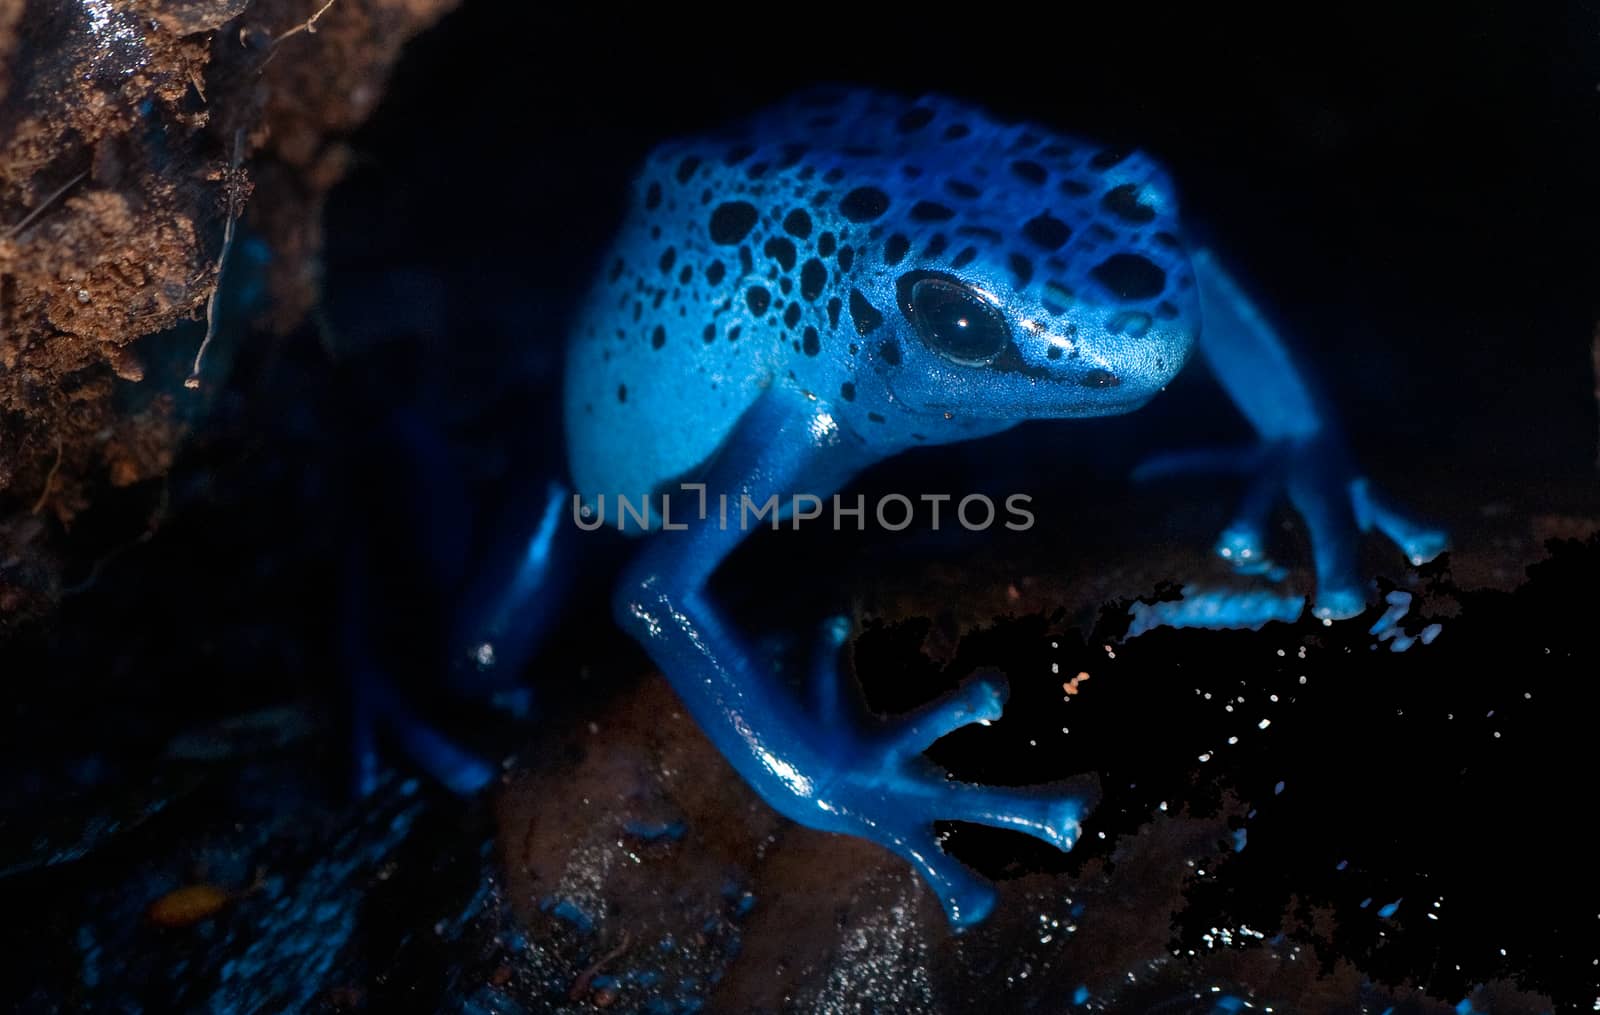 Small Blue frog hiding under a rock in an acquarium